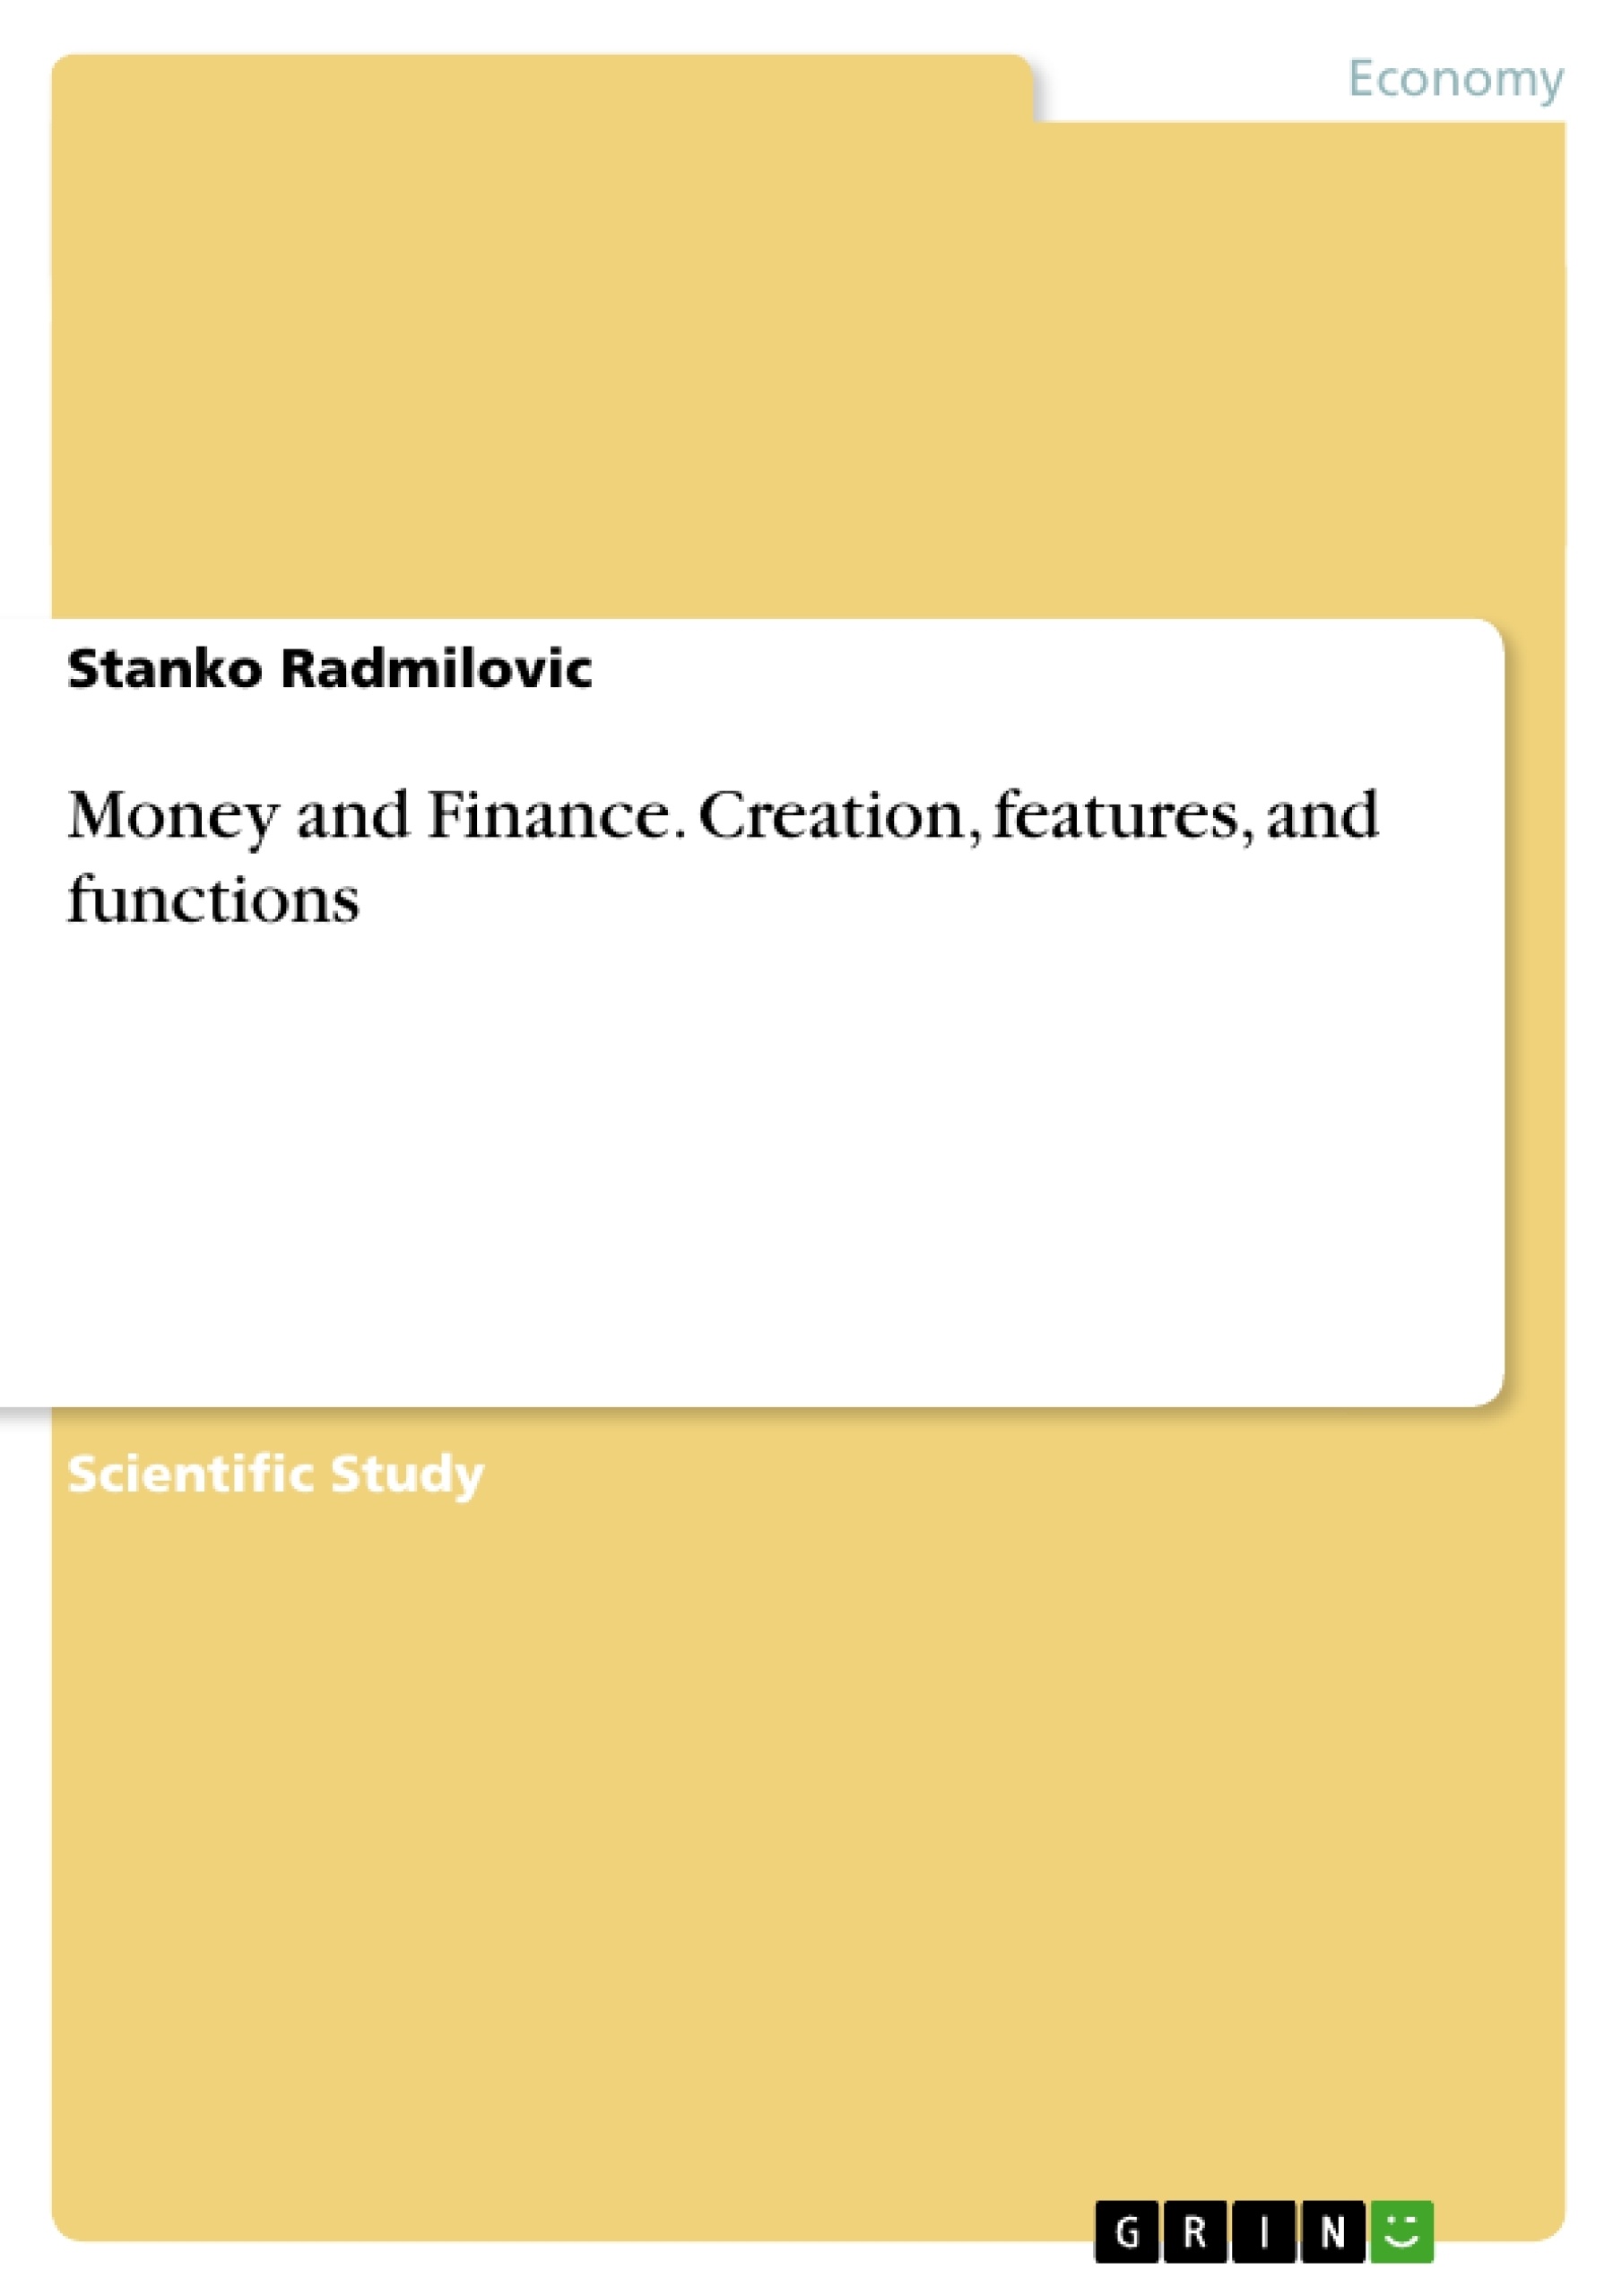 Titre: Money and Finance. Creation, features, and functions